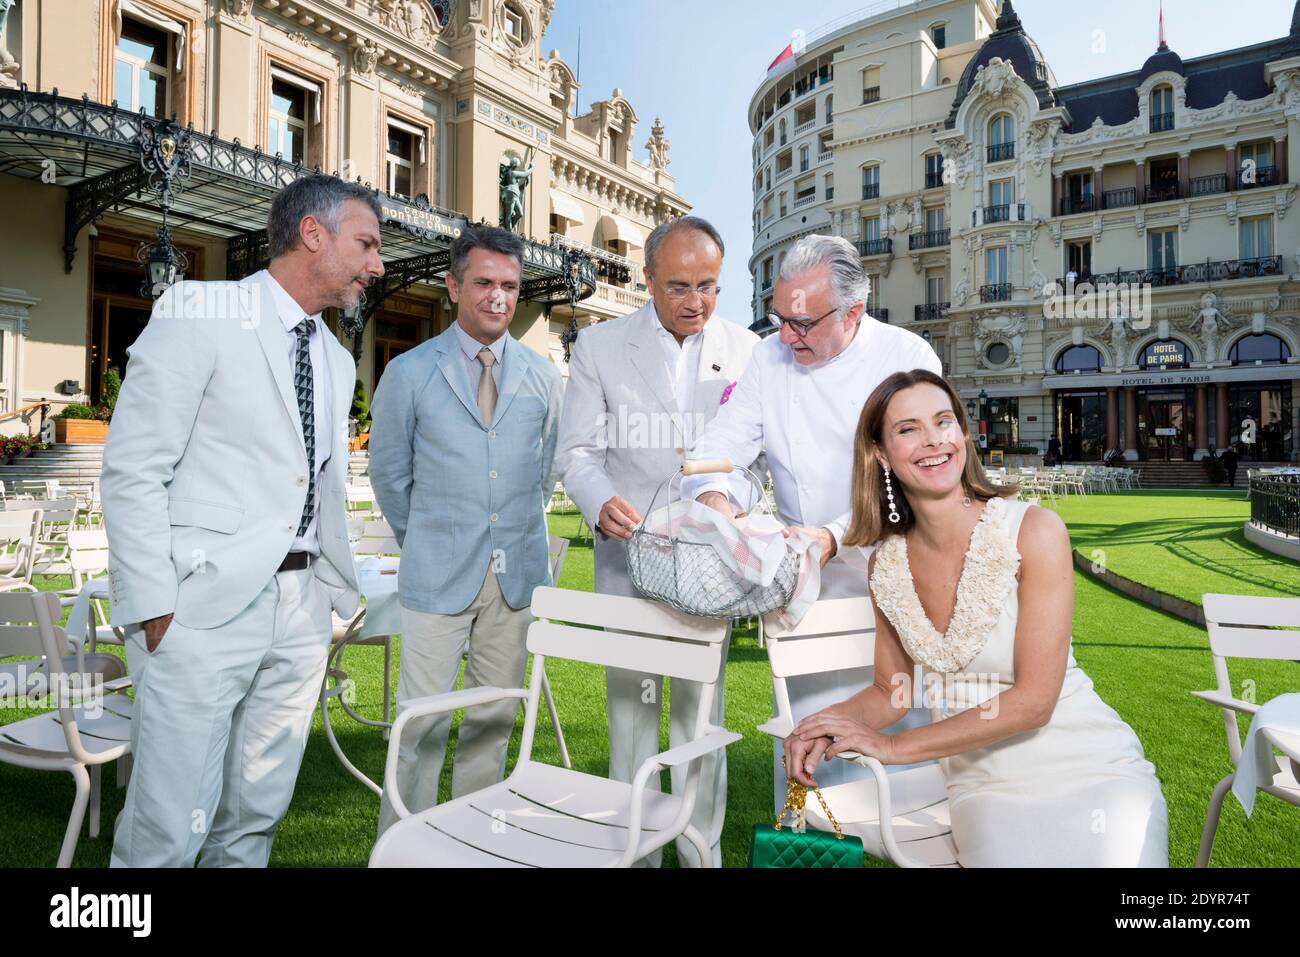 Brazilian designers Fernando Campana and Humberto Campana, executive chairman of Monte-Carlo SBM (Societe des Bains de Mer) Jean-Luc Biamonti, actress Carole Bouquet and French chef Alain Ducasse pose for a photograph in front of the Monte-Carlo's casino during a ceremony marking the 150th anniversary of the SBM in Monte-Carlo, Monaco, on July 5, 2013. Photo by Philippe Petit/Pool/ABACAPRESS.COM Stock Photo